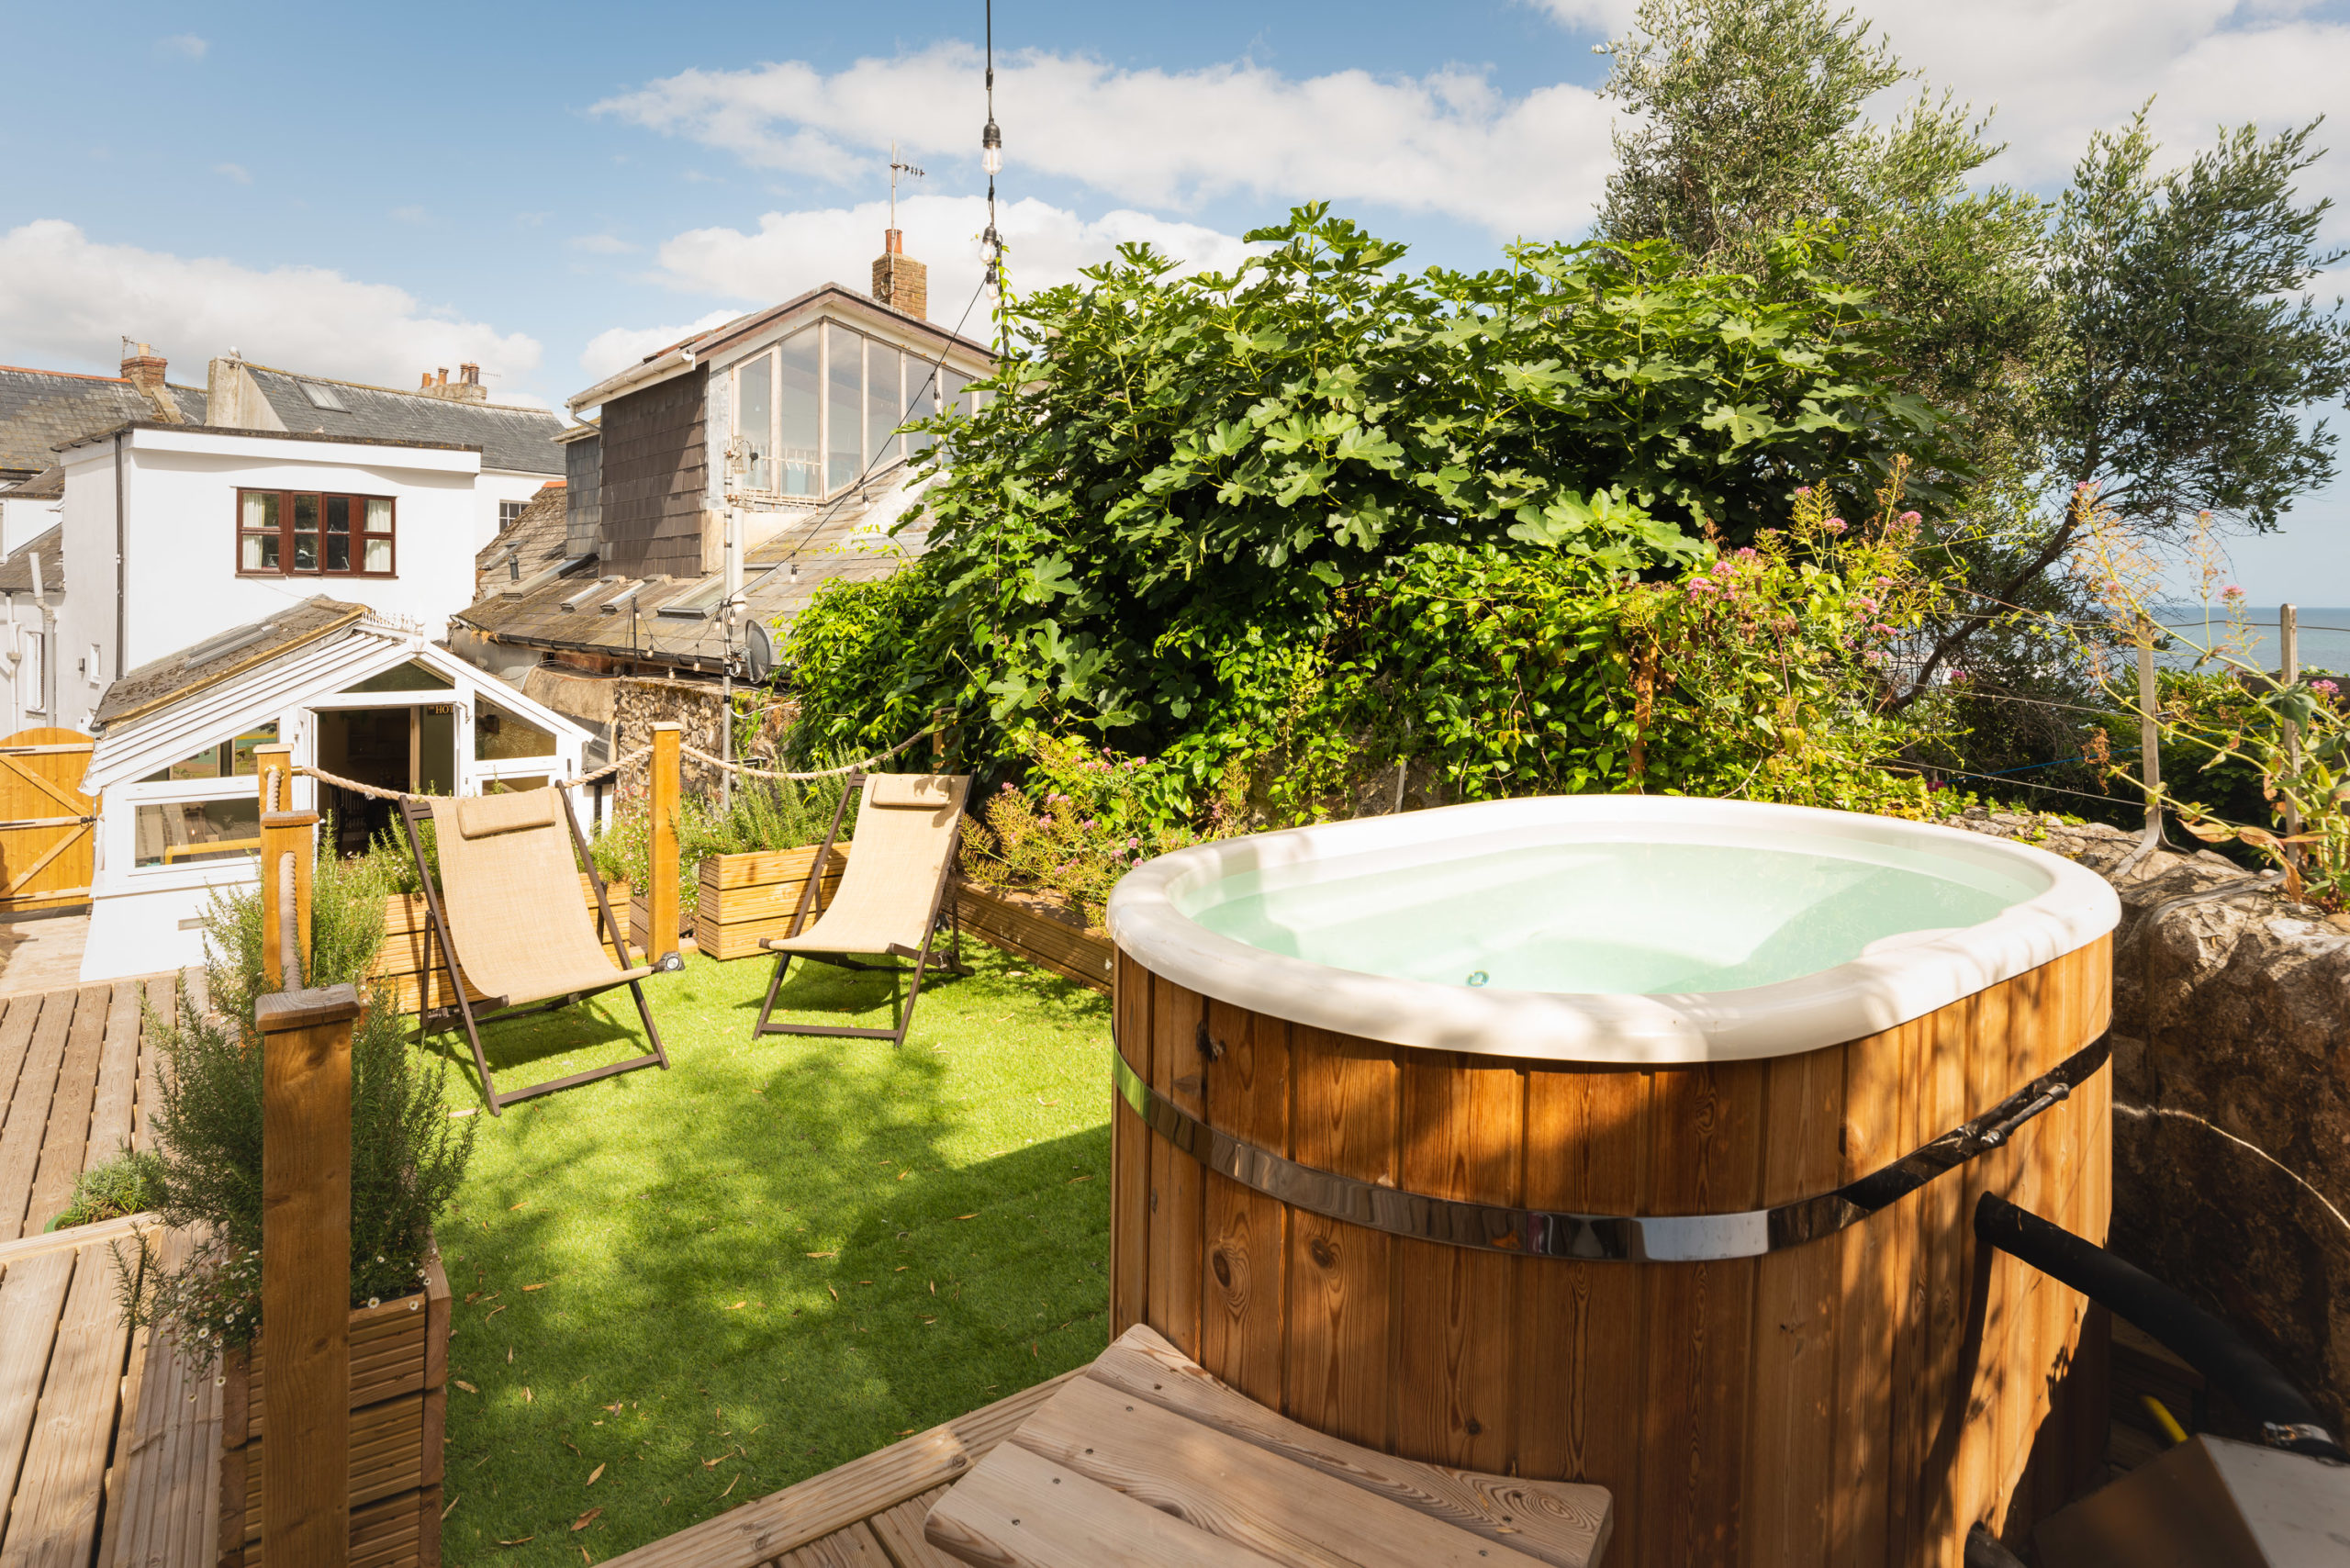 Holiday let in Dorset with wood fired hot tub and sea views